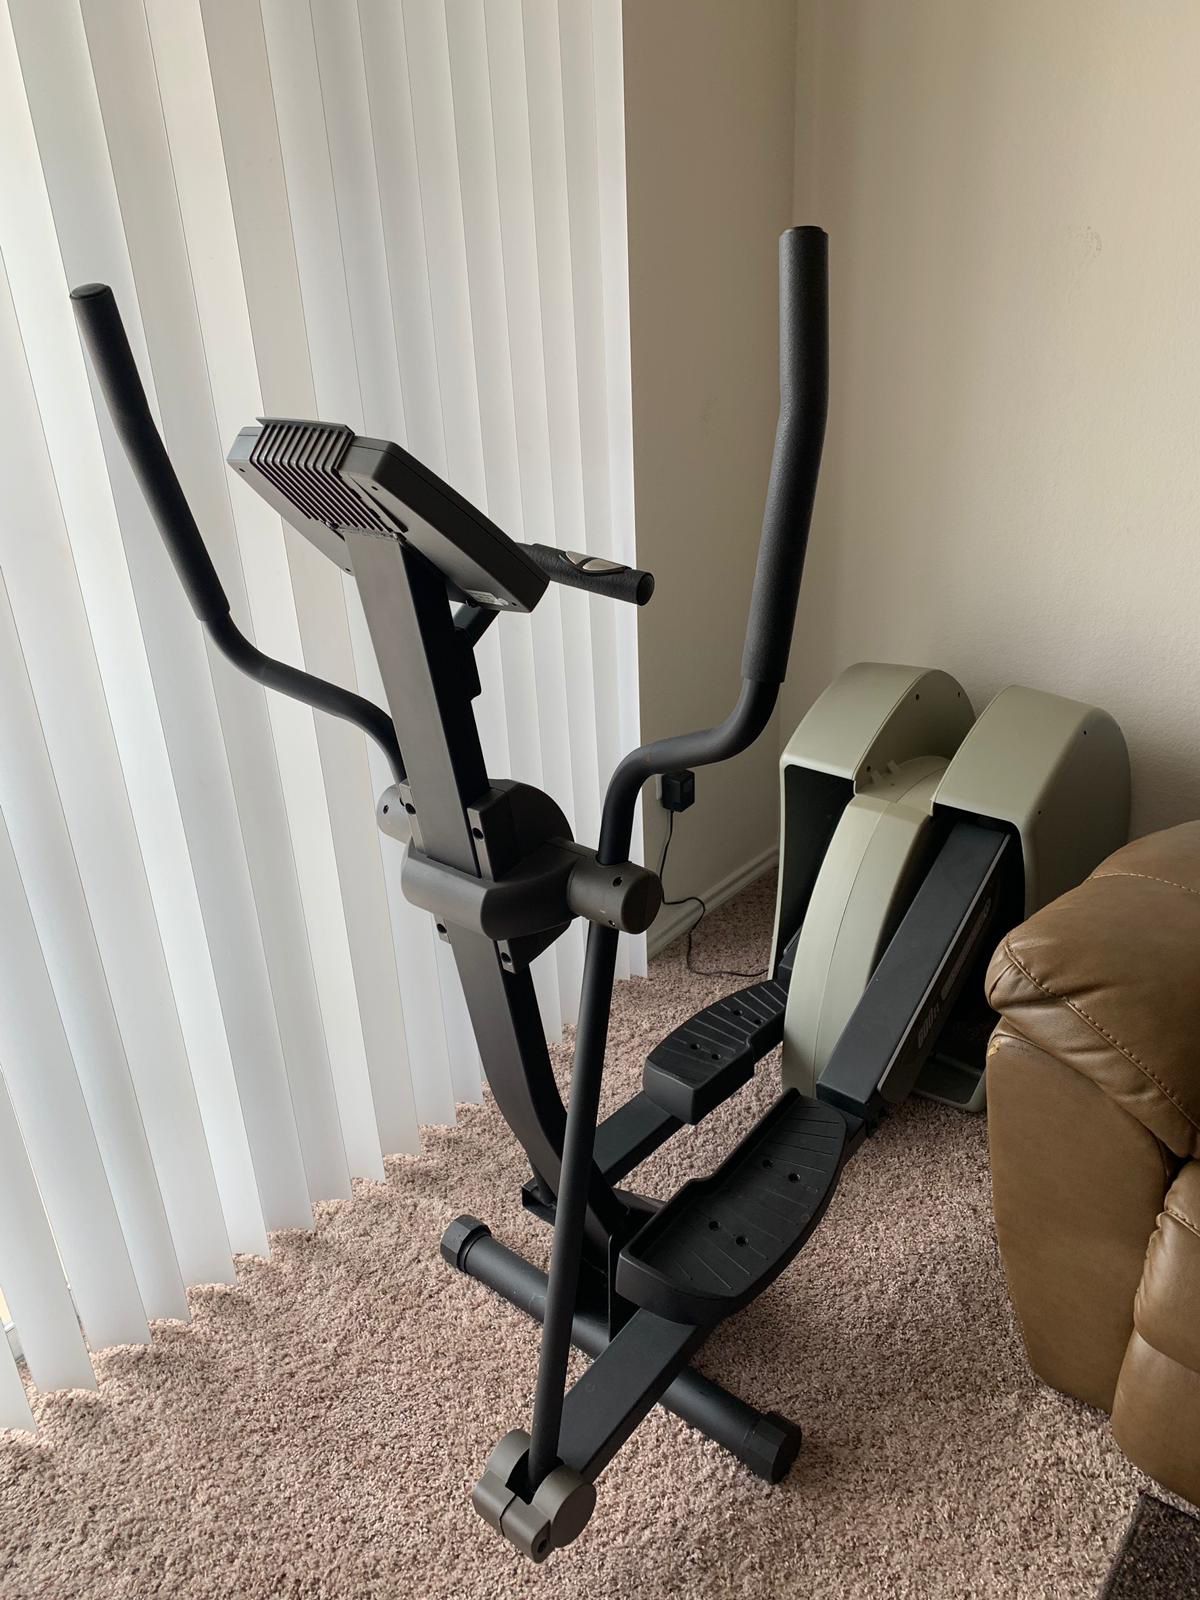 Electric Elliptical in perfect working condition